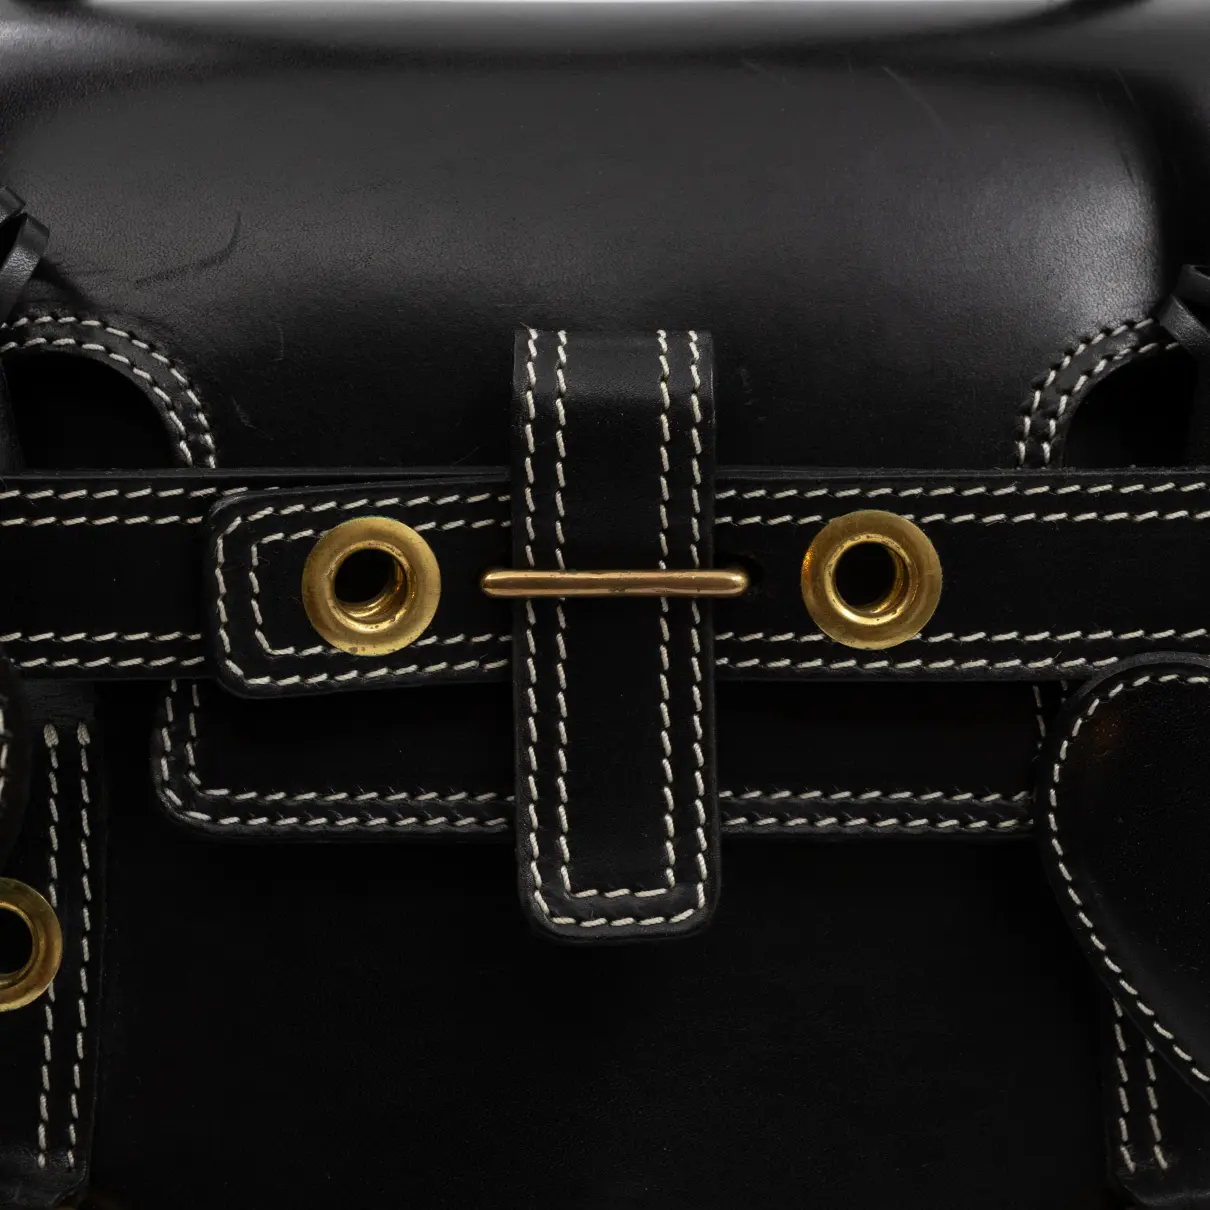 Leather satchel Mulberry